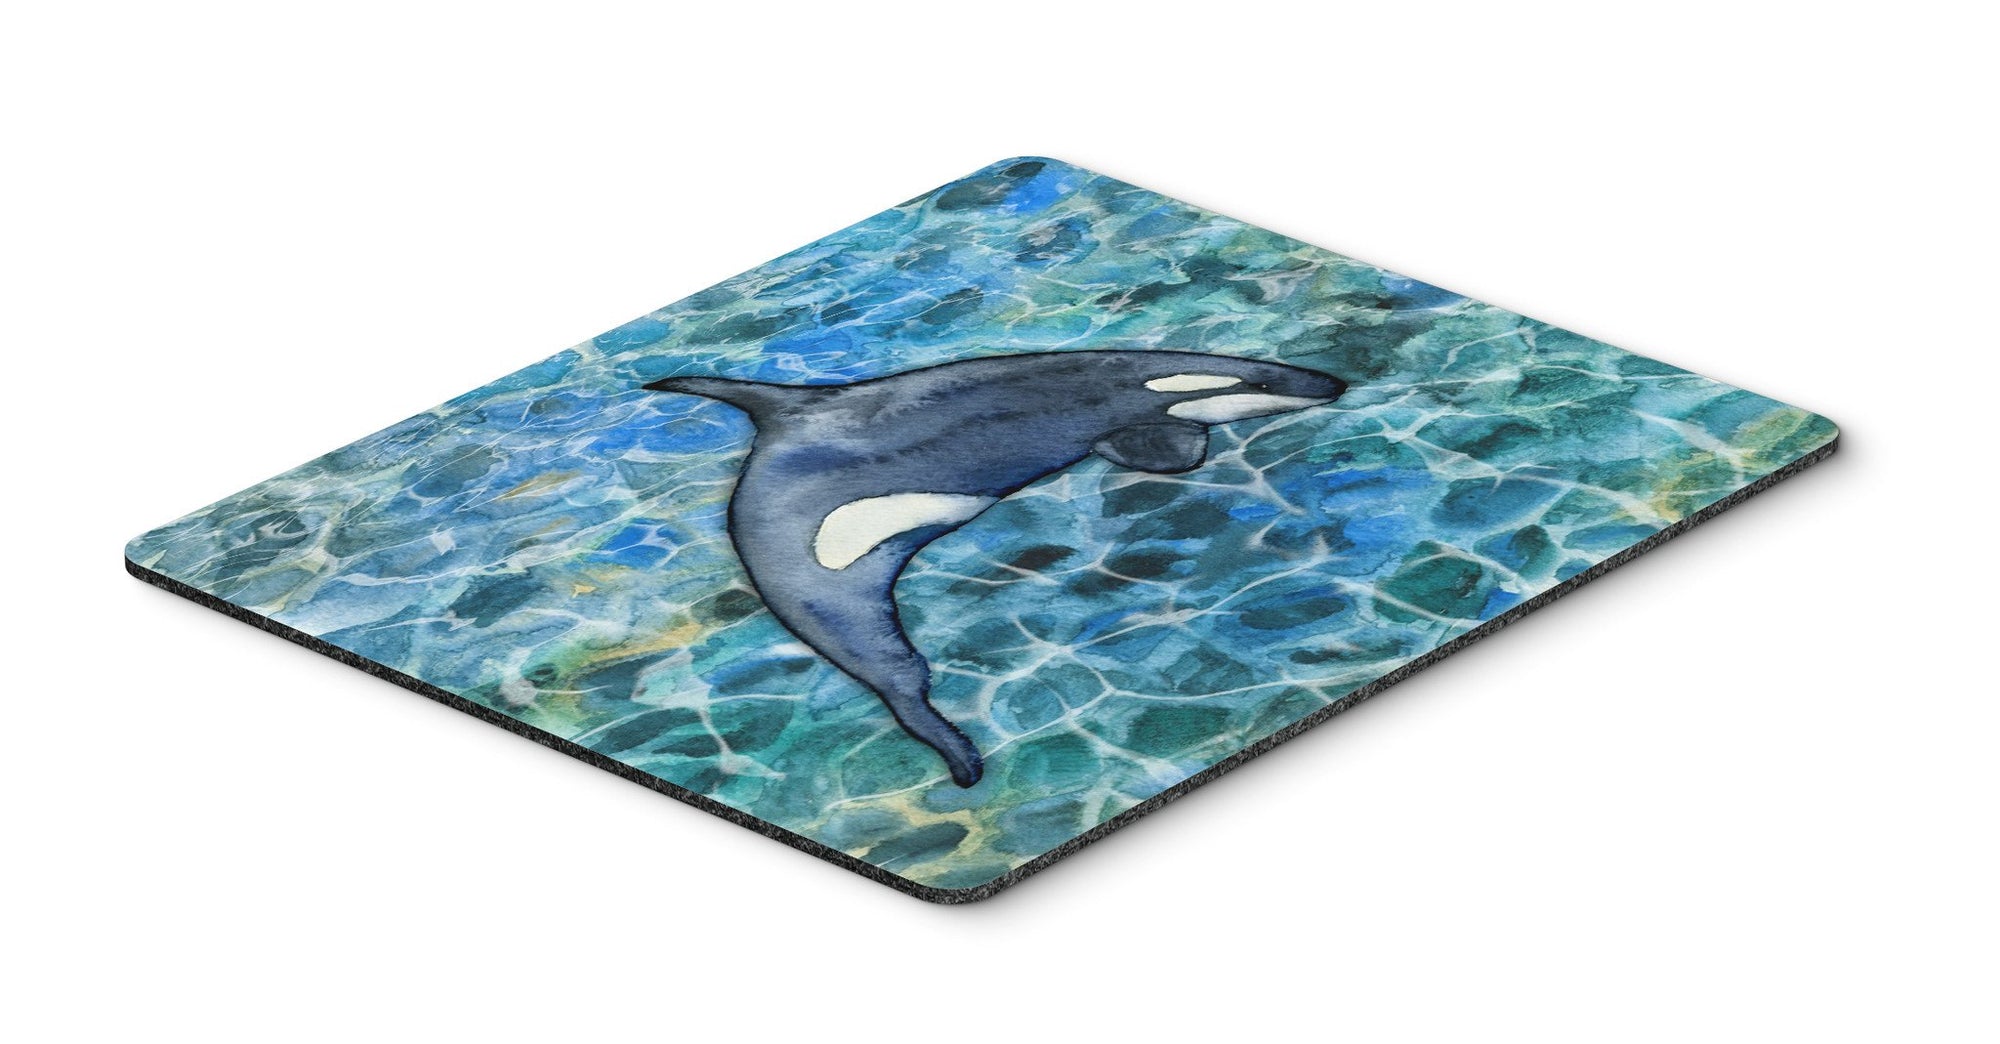 Killer Whale Orca #2 Mouse Pad, Hot Pad or Trivet BB5335MP by Caroline's Treasures